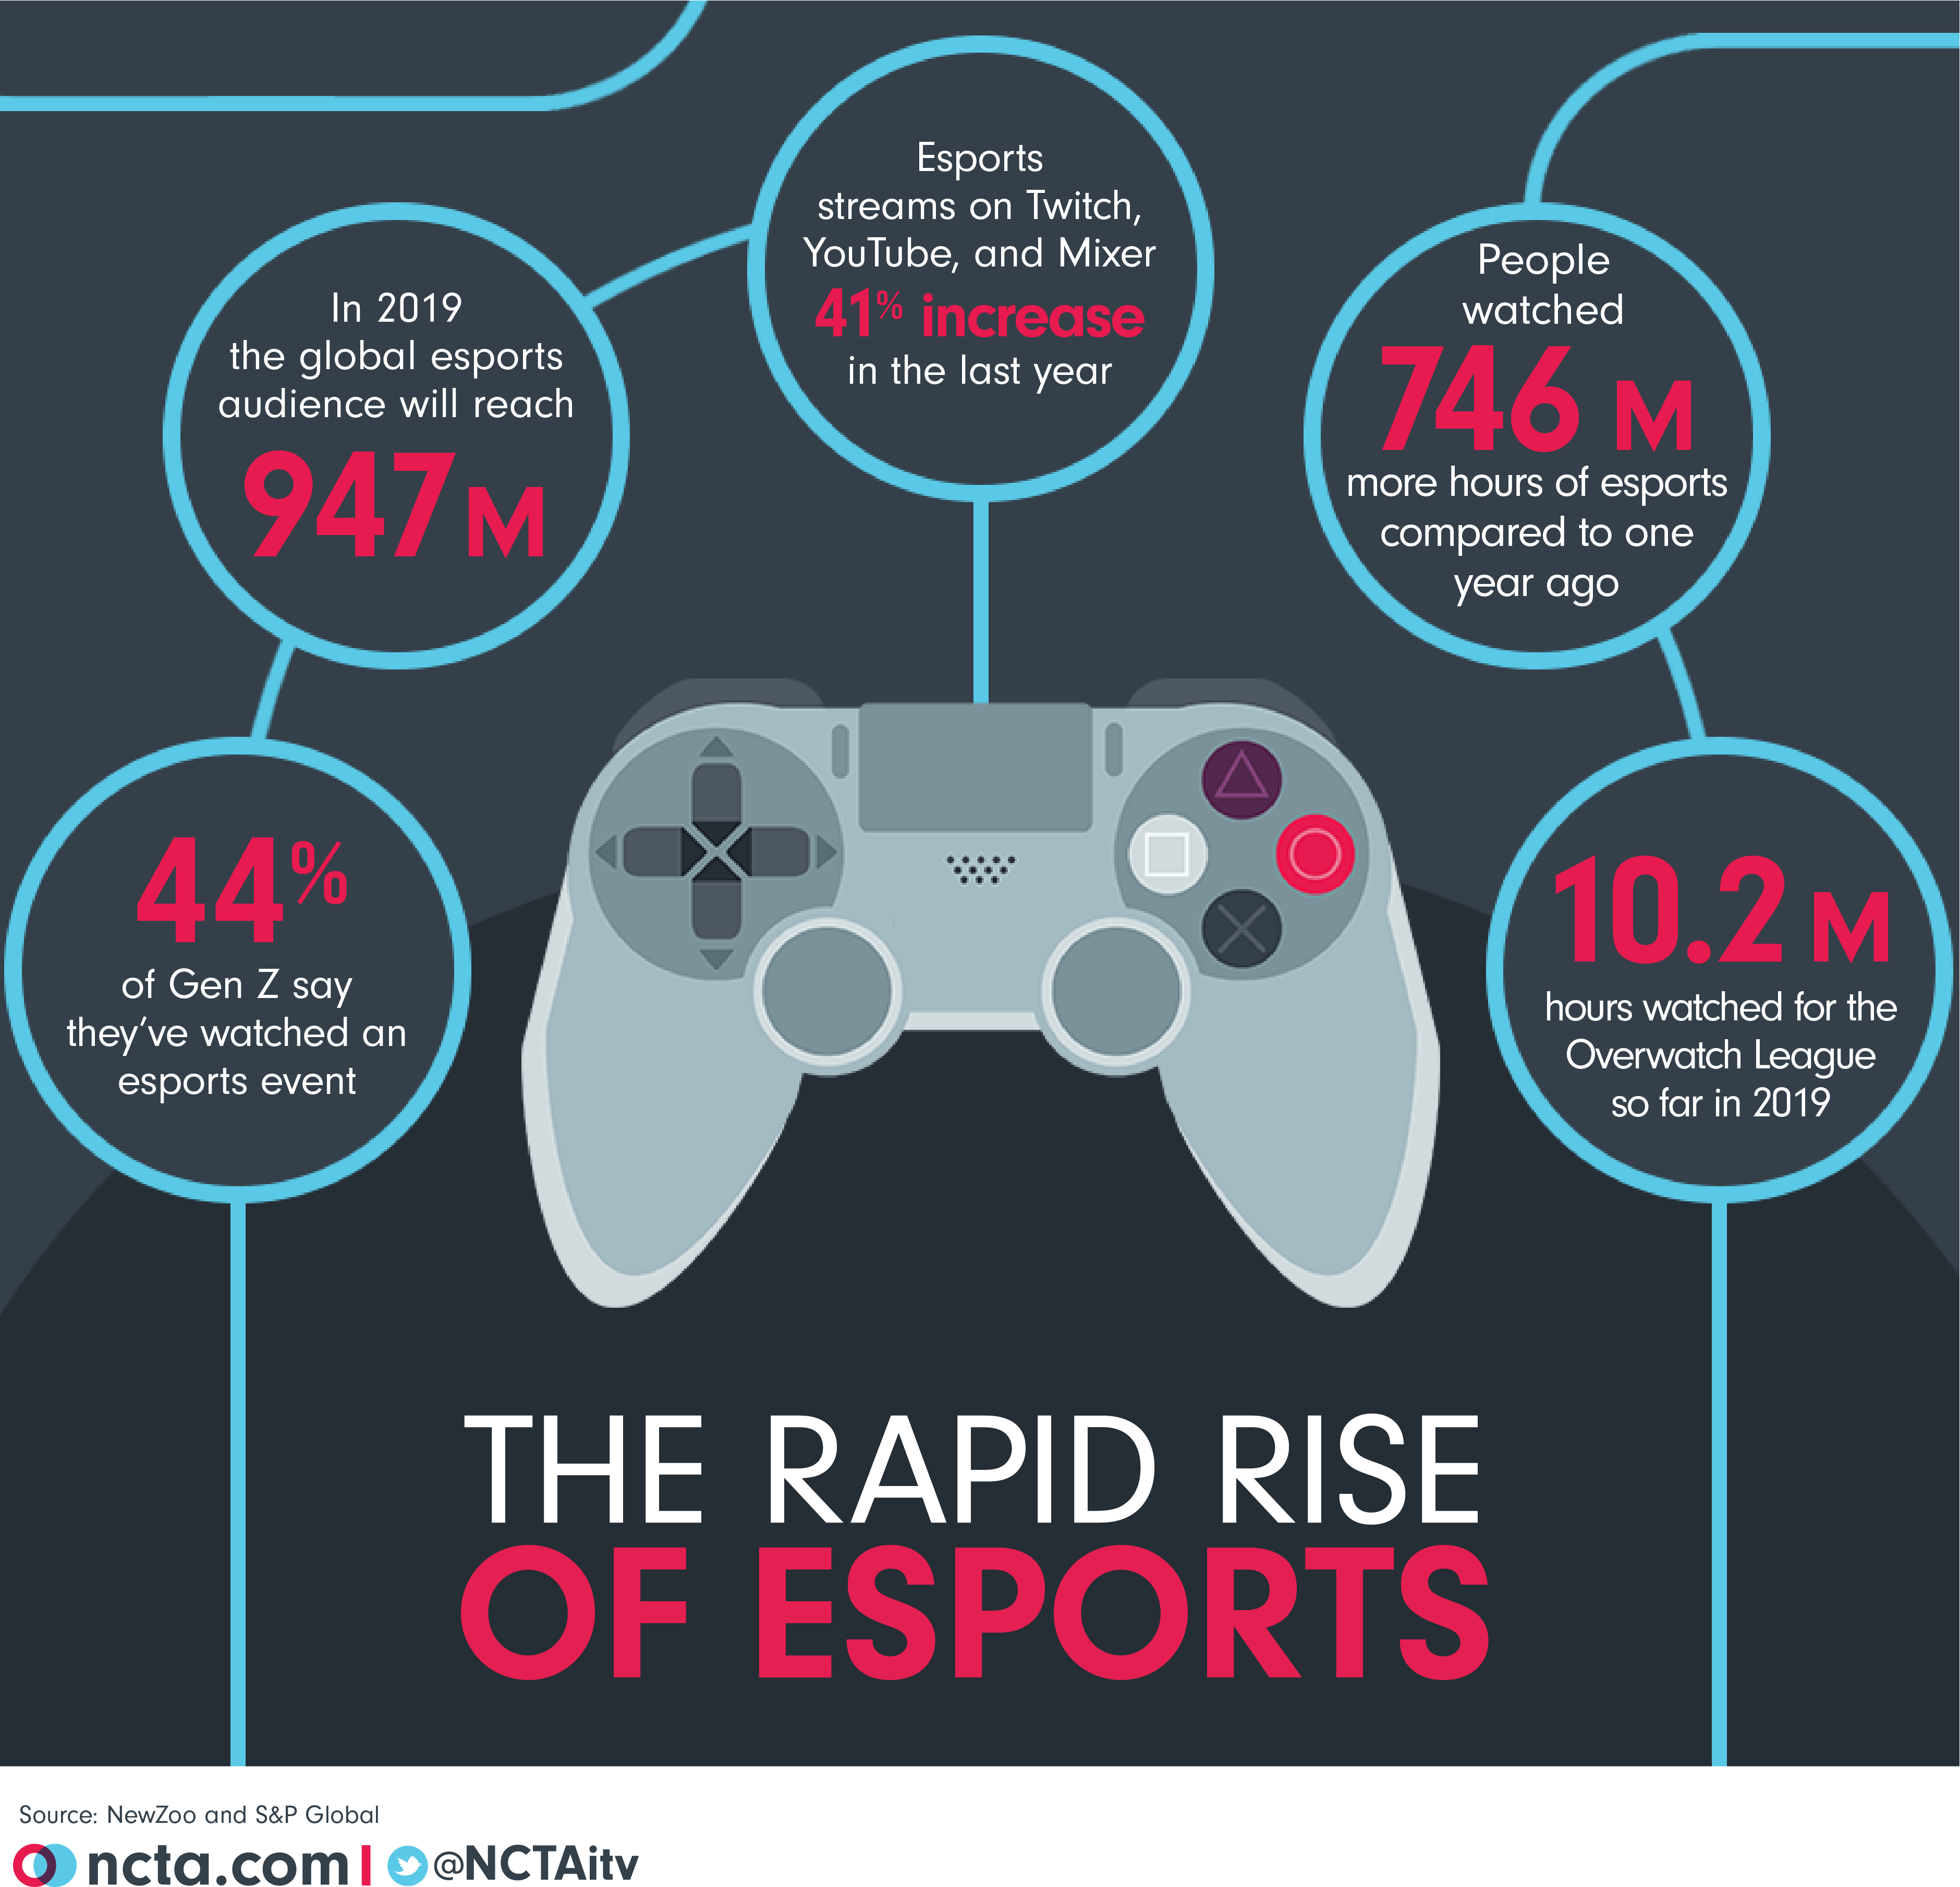 The Rapid Rise of Esports